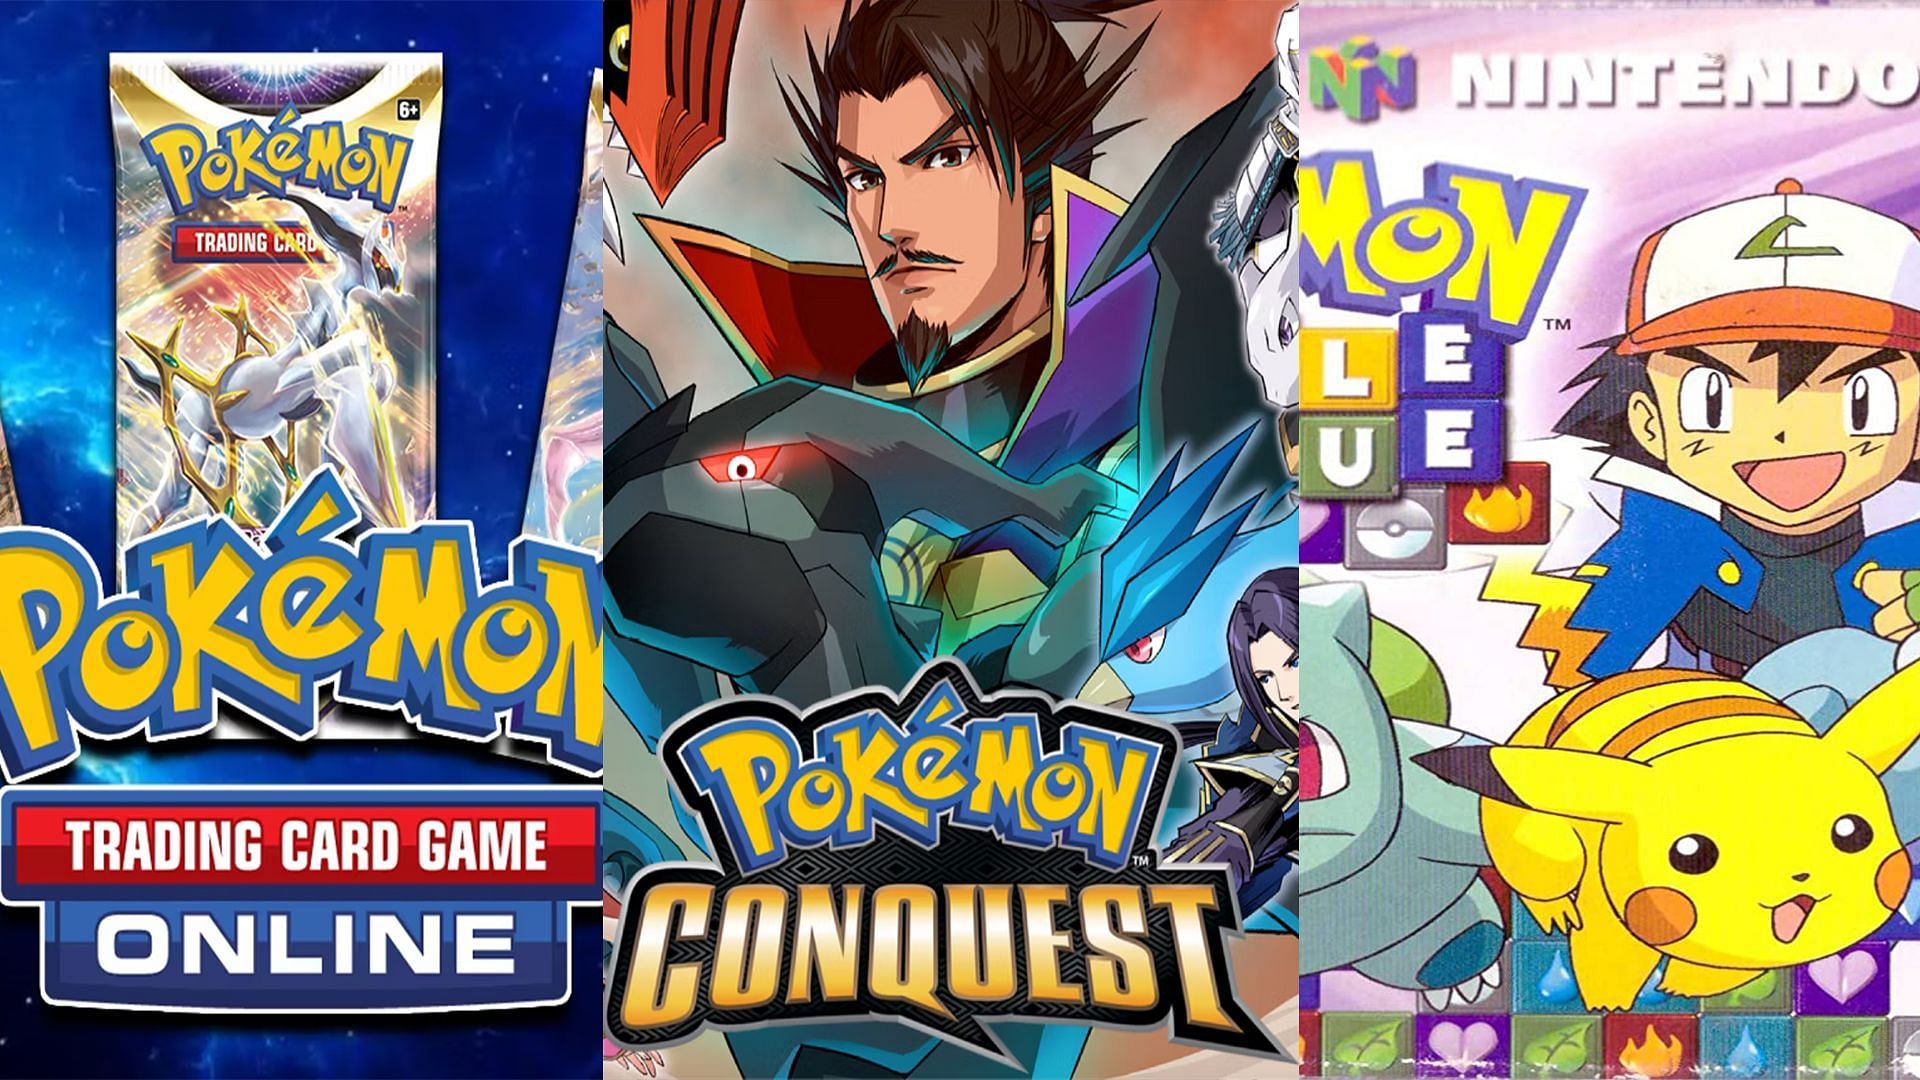 5 most underrated Pokemon games that you have probably never heard of